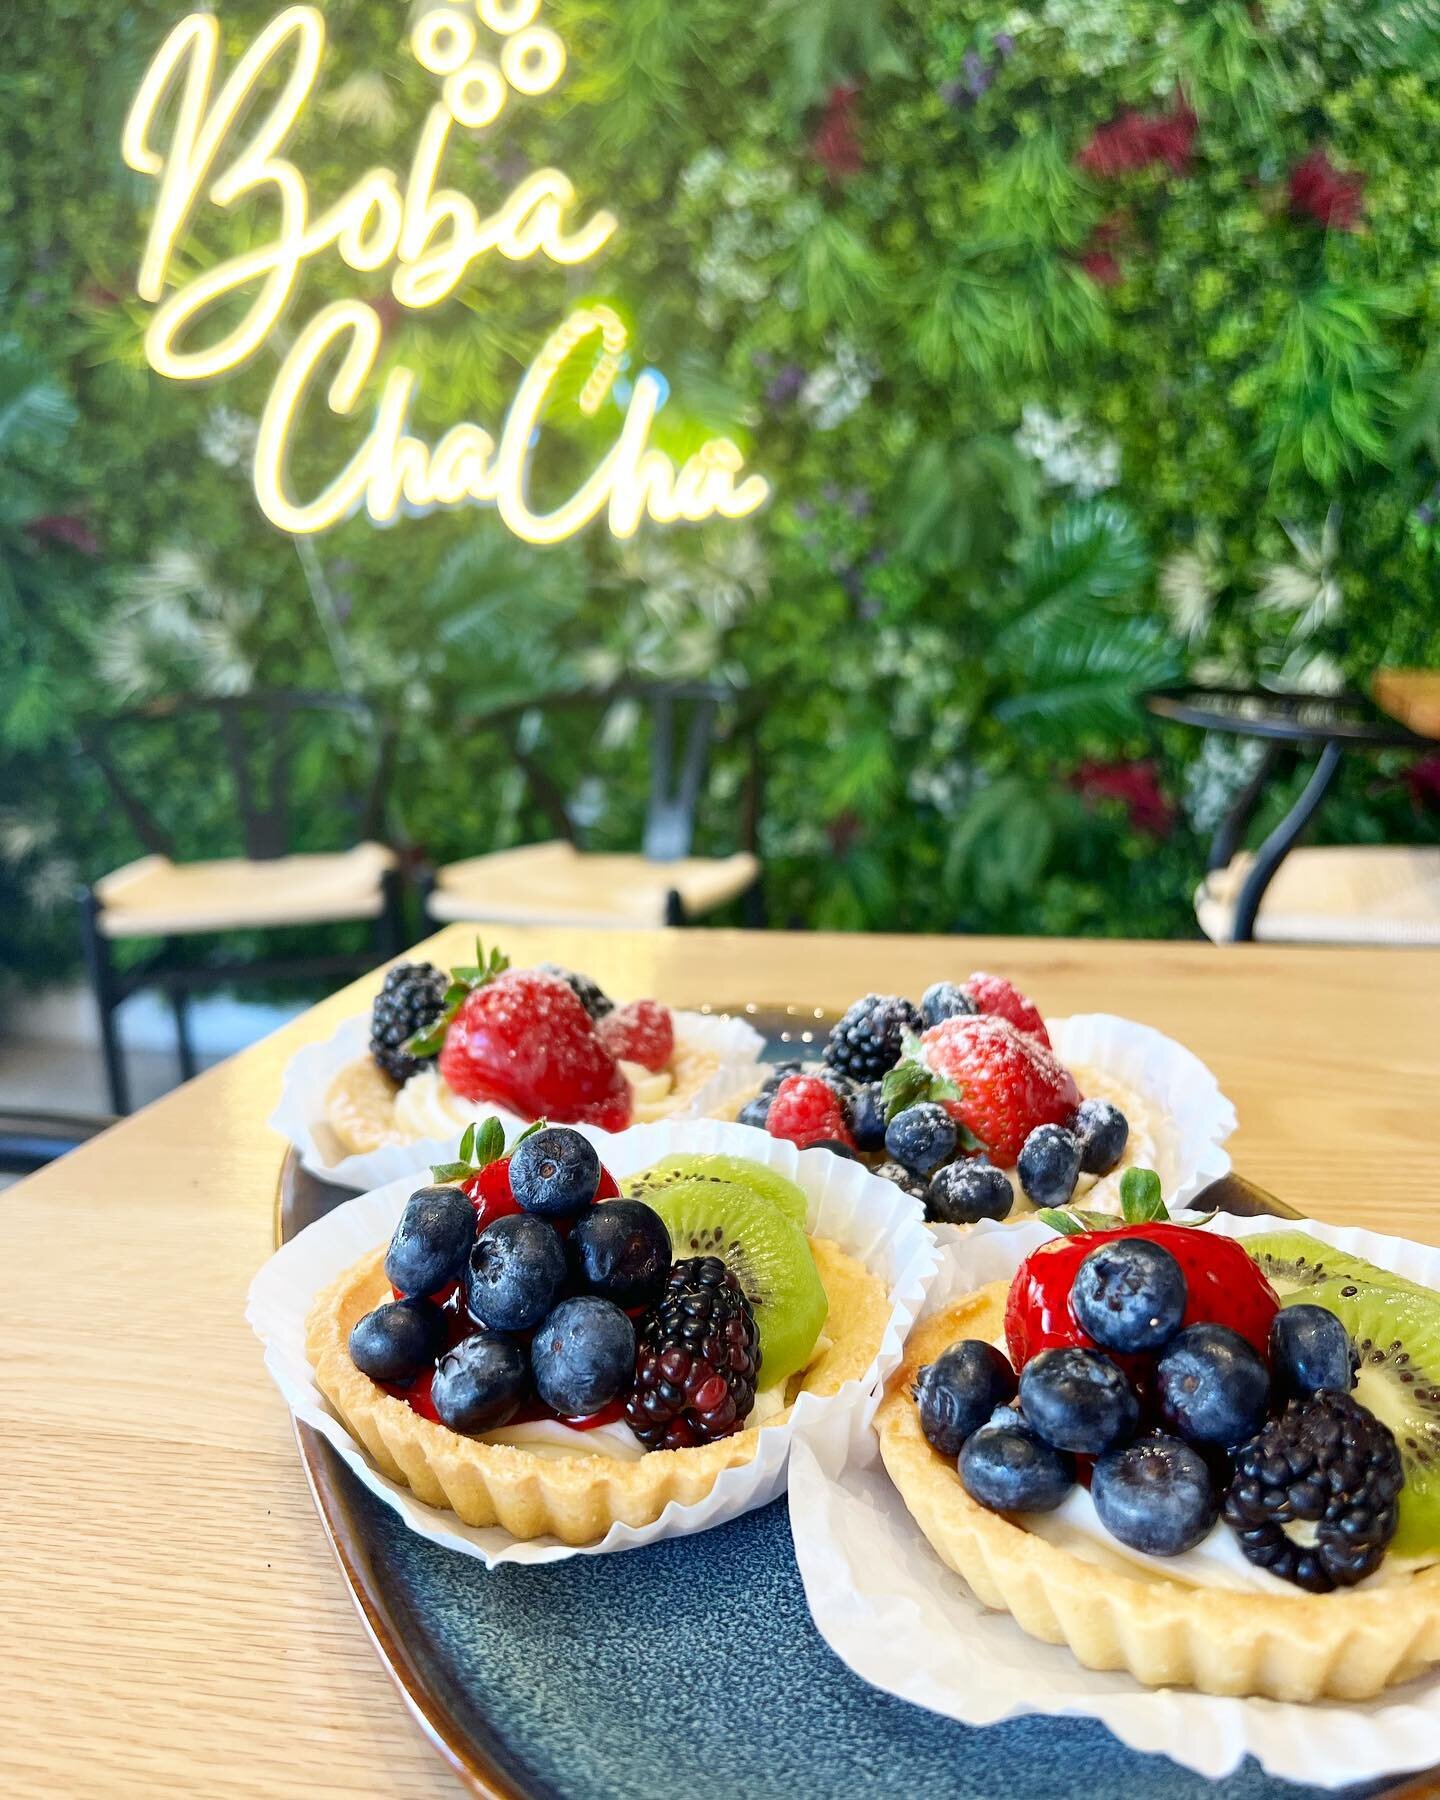 Fruit tarts and other delicious fresh baked goods from local bakers have just arrived! 💗🧋
It&rsquo;s the perfect match with one of our delicious drinks so stop but while they last💗

.
.
.
.

#boba #bubbletea #bobatea #milktea #bobamilktea #pasaden